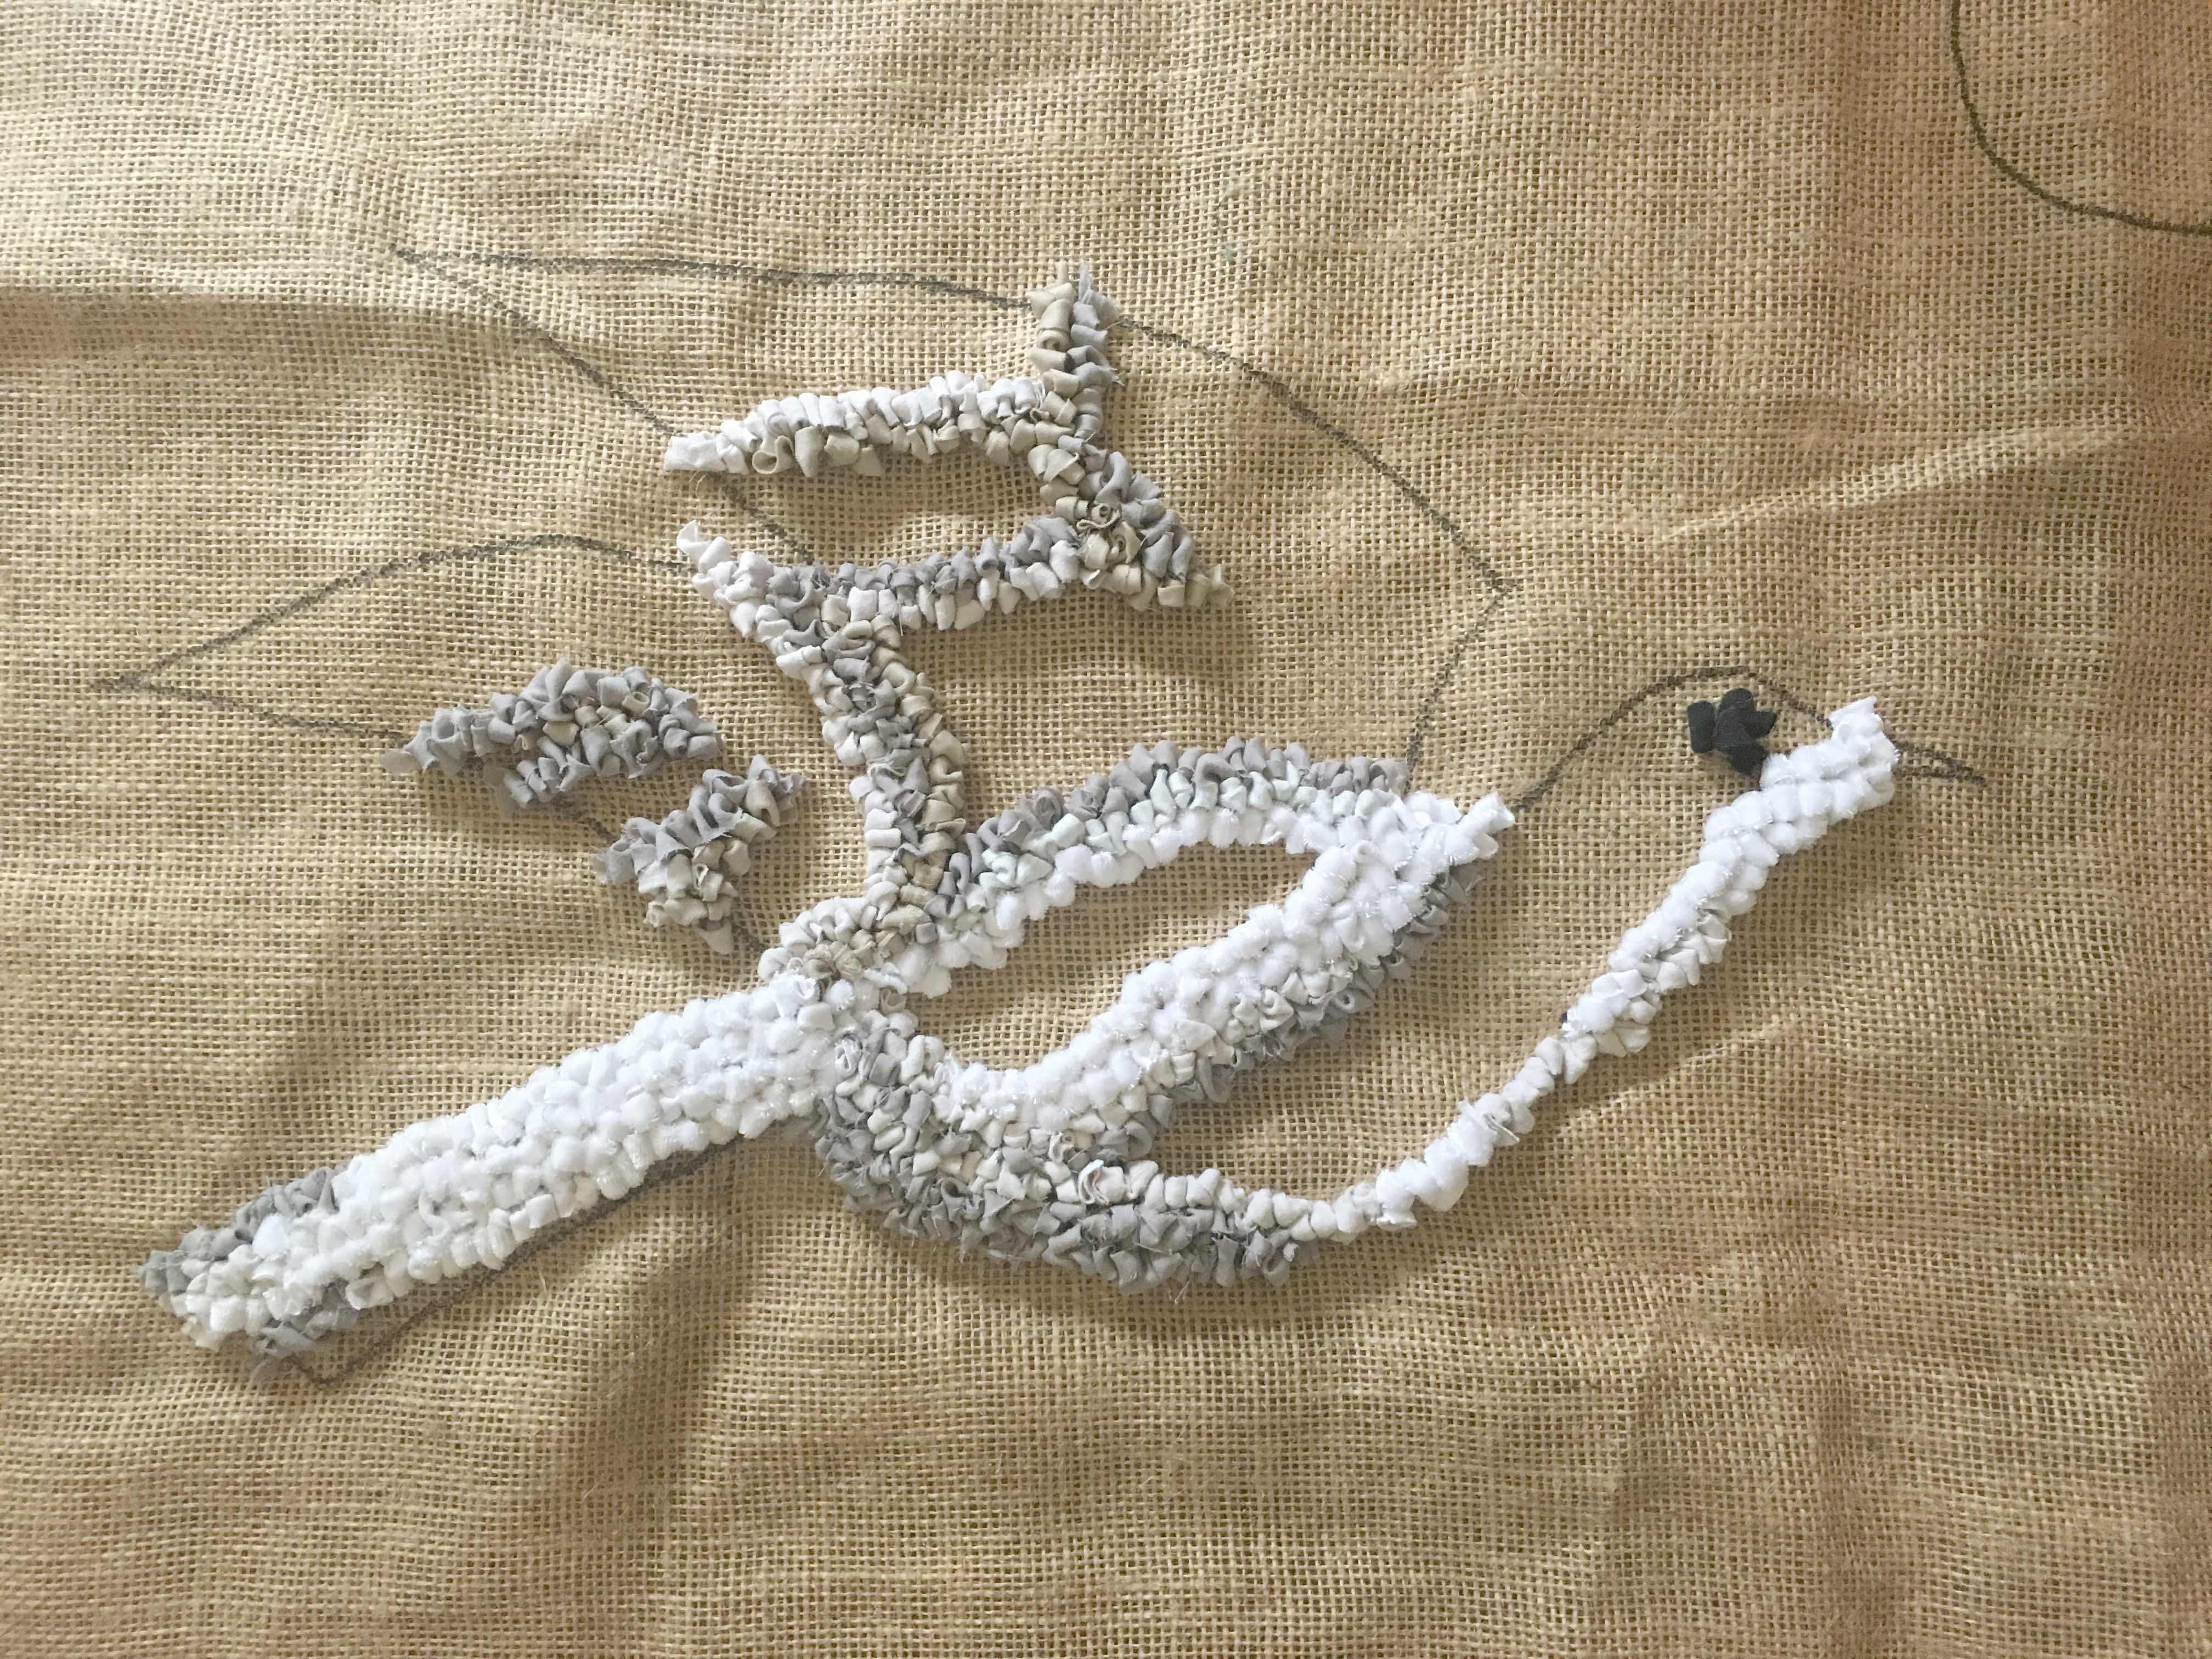 The Beginning of a Rag Rug Commission of a Dove on hessian